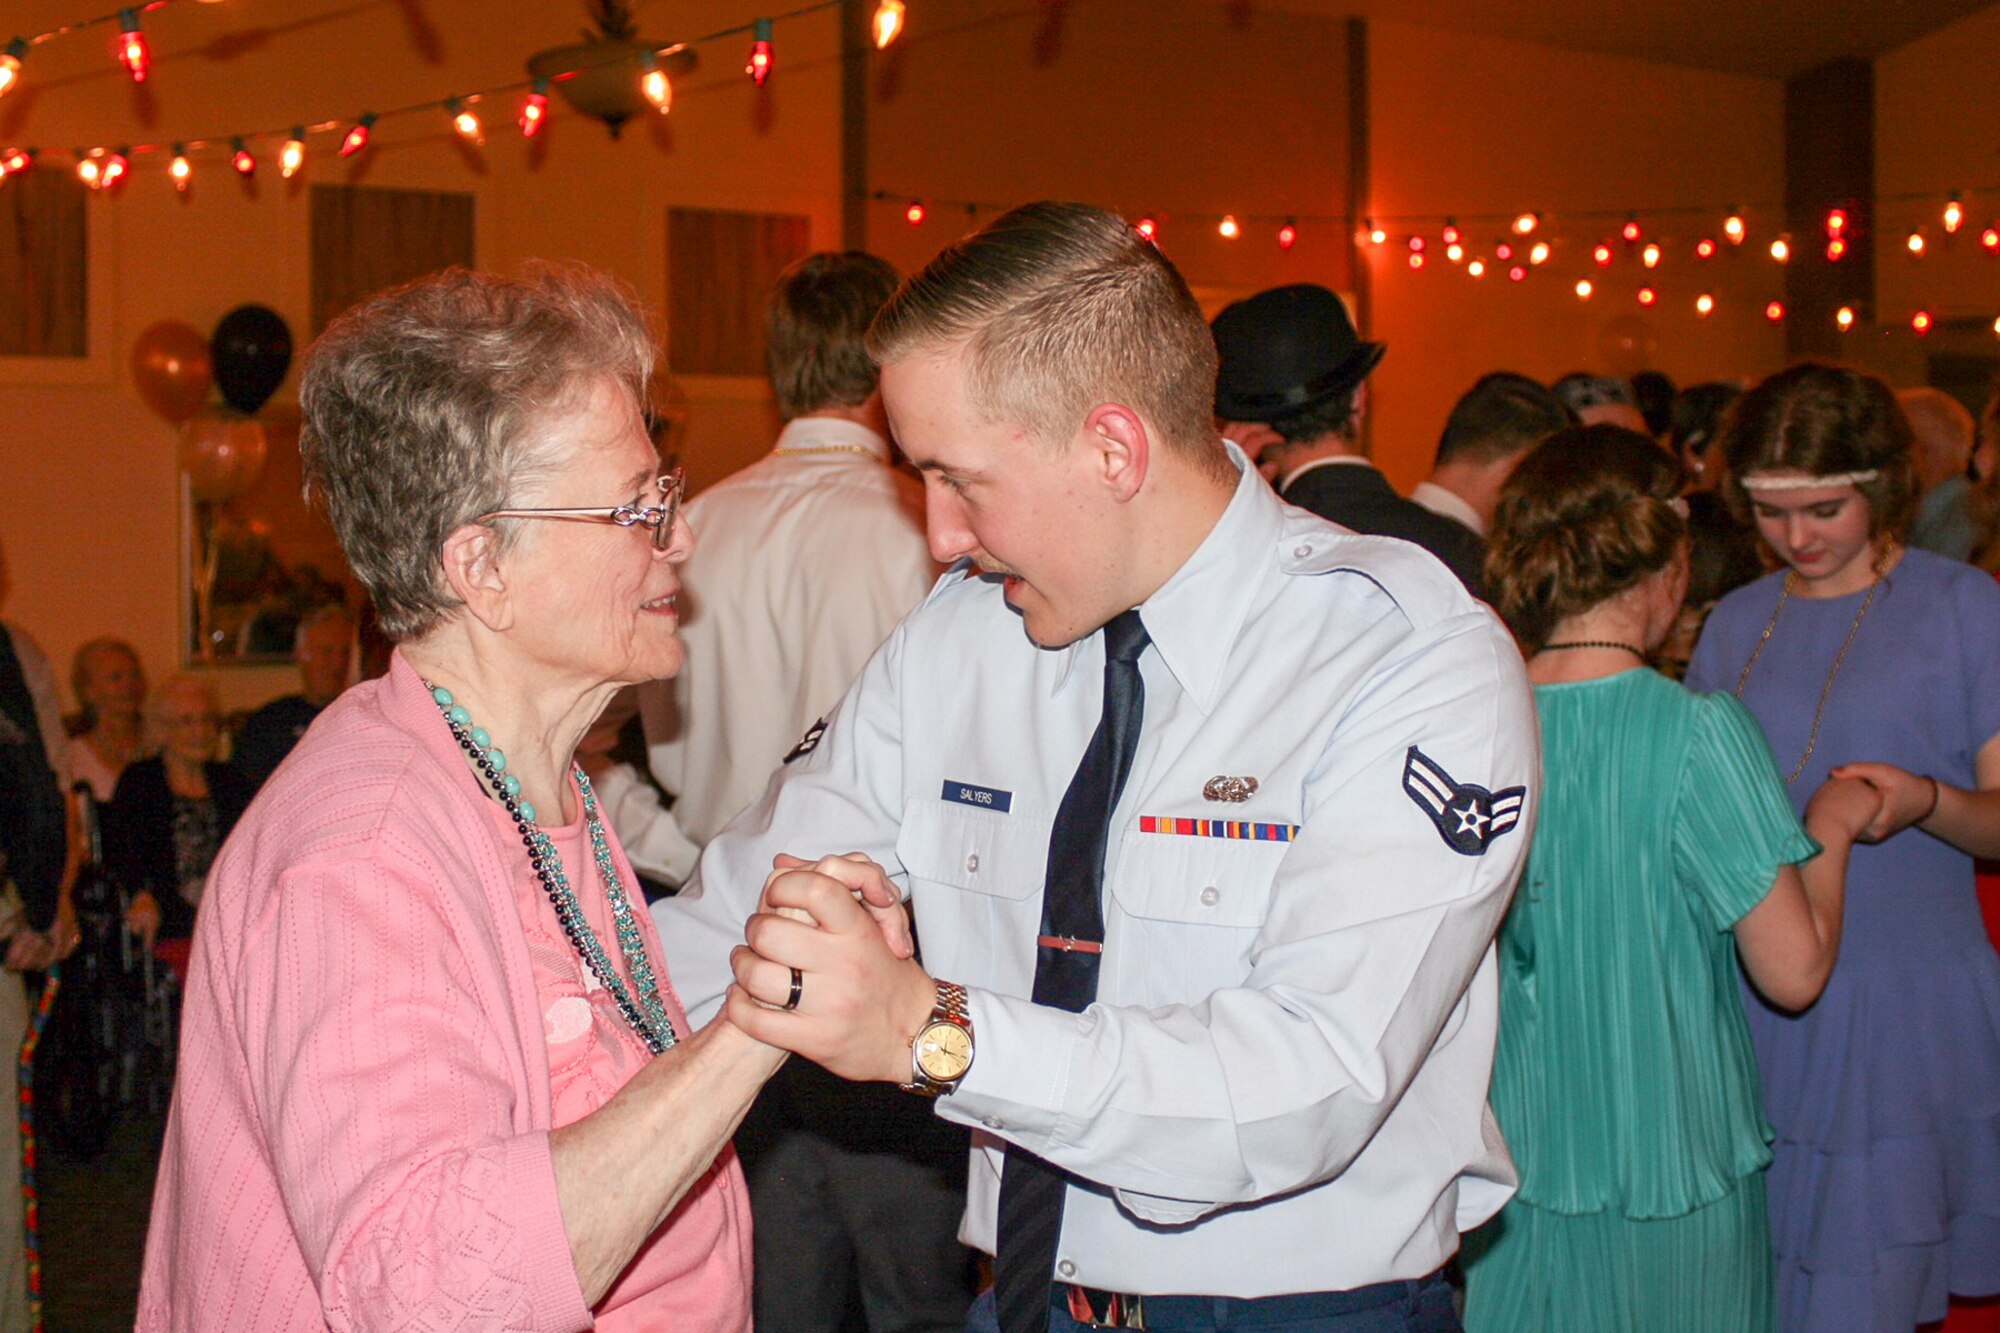 Airman First Class Austyn Salyers, 75th Air Base Wing Communications and Information Directorate, dances with a resident of Chancellor Gardens Senior Living Center in Clearfield Feb. 13 at the Valentines Dance. More than 60 residents attended and mingled with Team Hill guests. Staff members noted that the Team Hill Airmen are "always the highlight of the event." (U.S. Air Force photo by Jen Eaton)